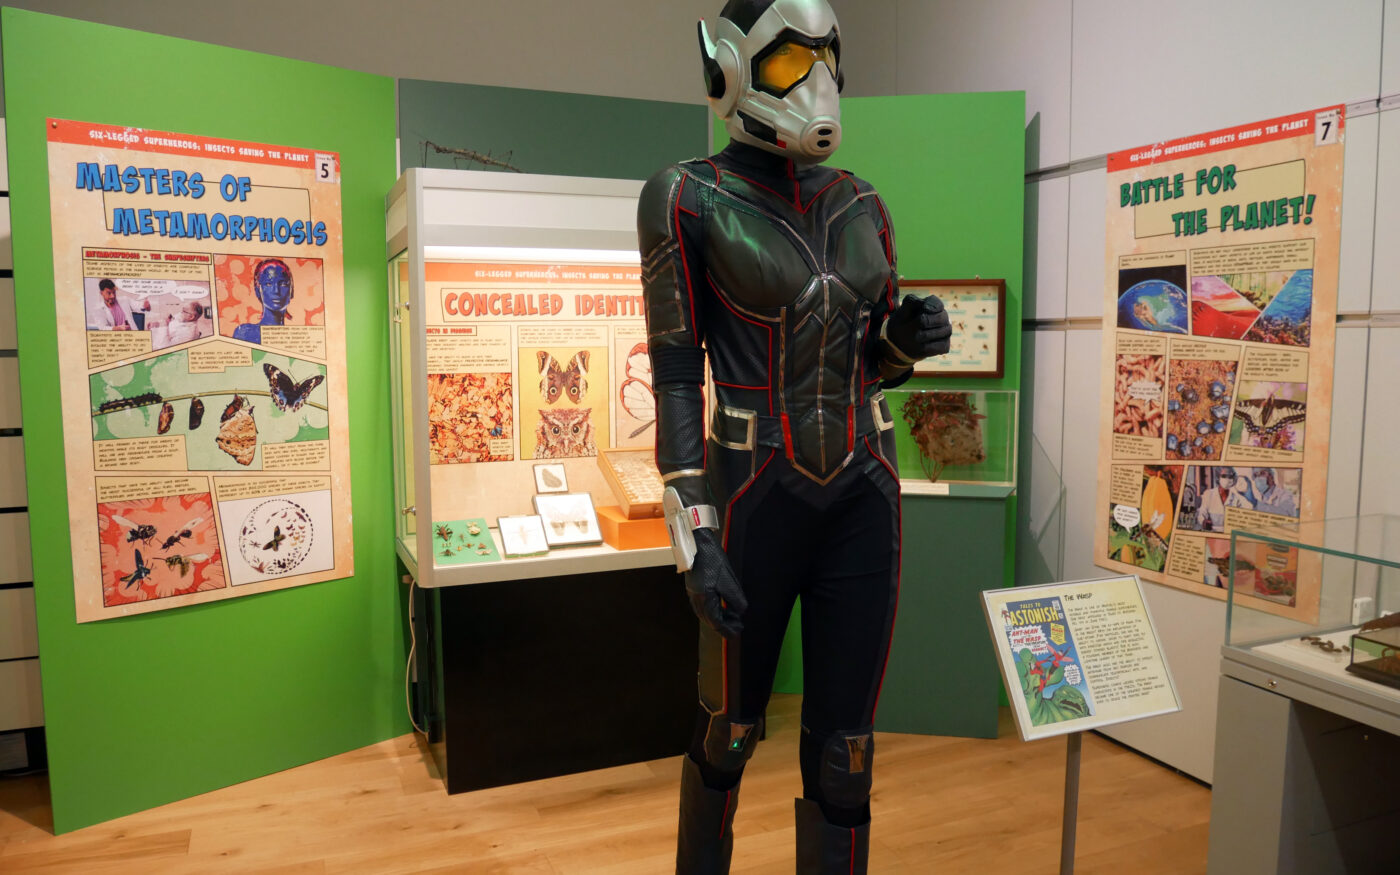 Cosplay costume of the Wasp with graphic panels and a display case behind it.